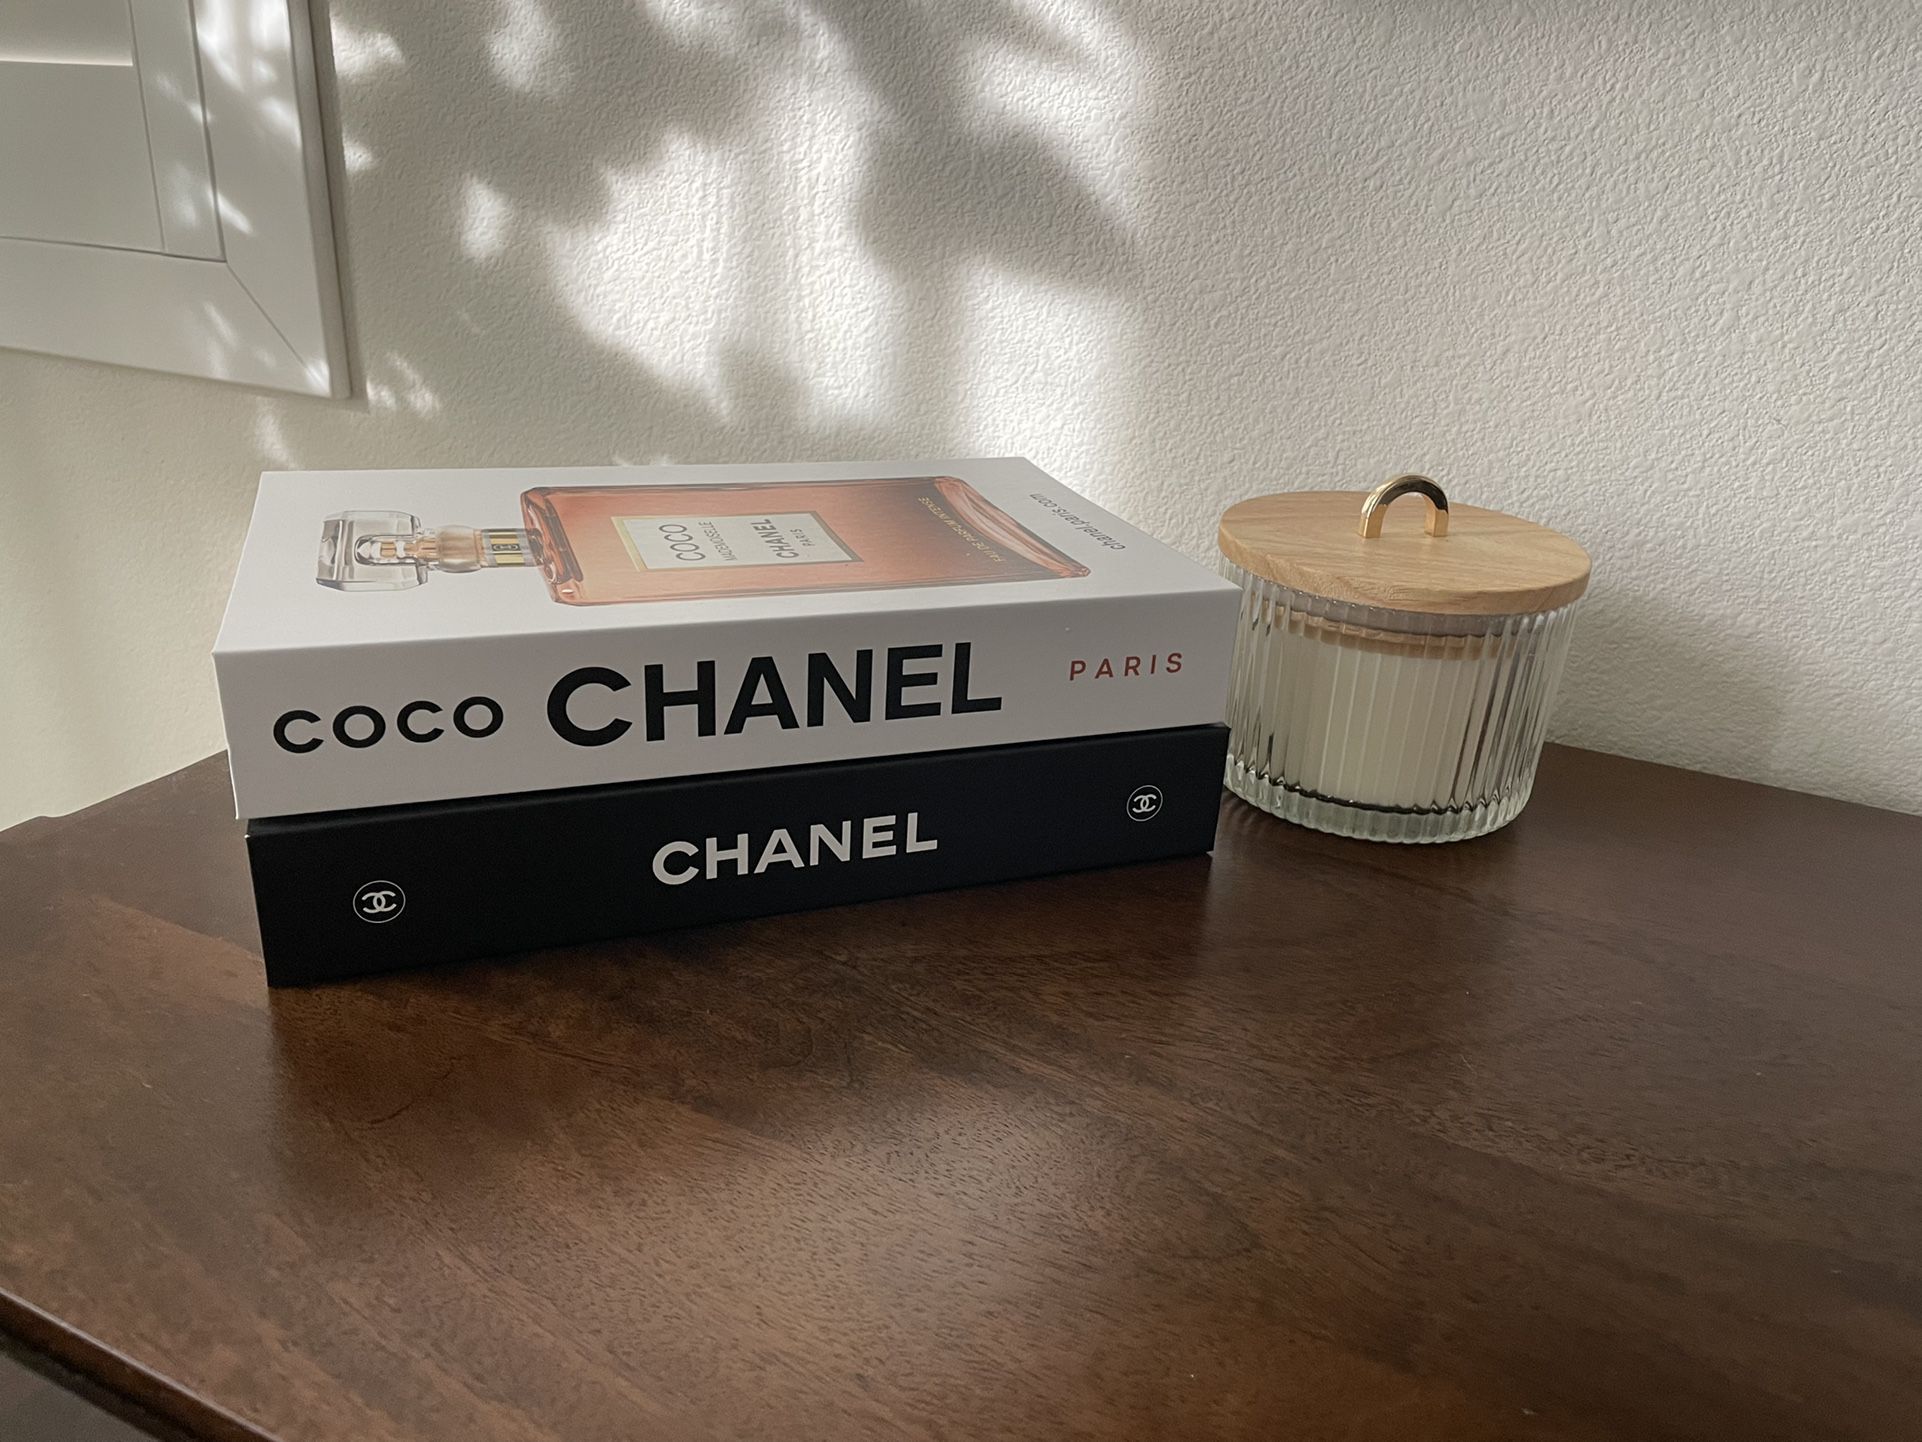 2023 Luxury Designers Coffee Table Books - TOM FORD | LOUIS VUITTON | PRADA  | CHANEL | HERMĒS | Home Decor for Sale in Ontario, CA - OfferUp